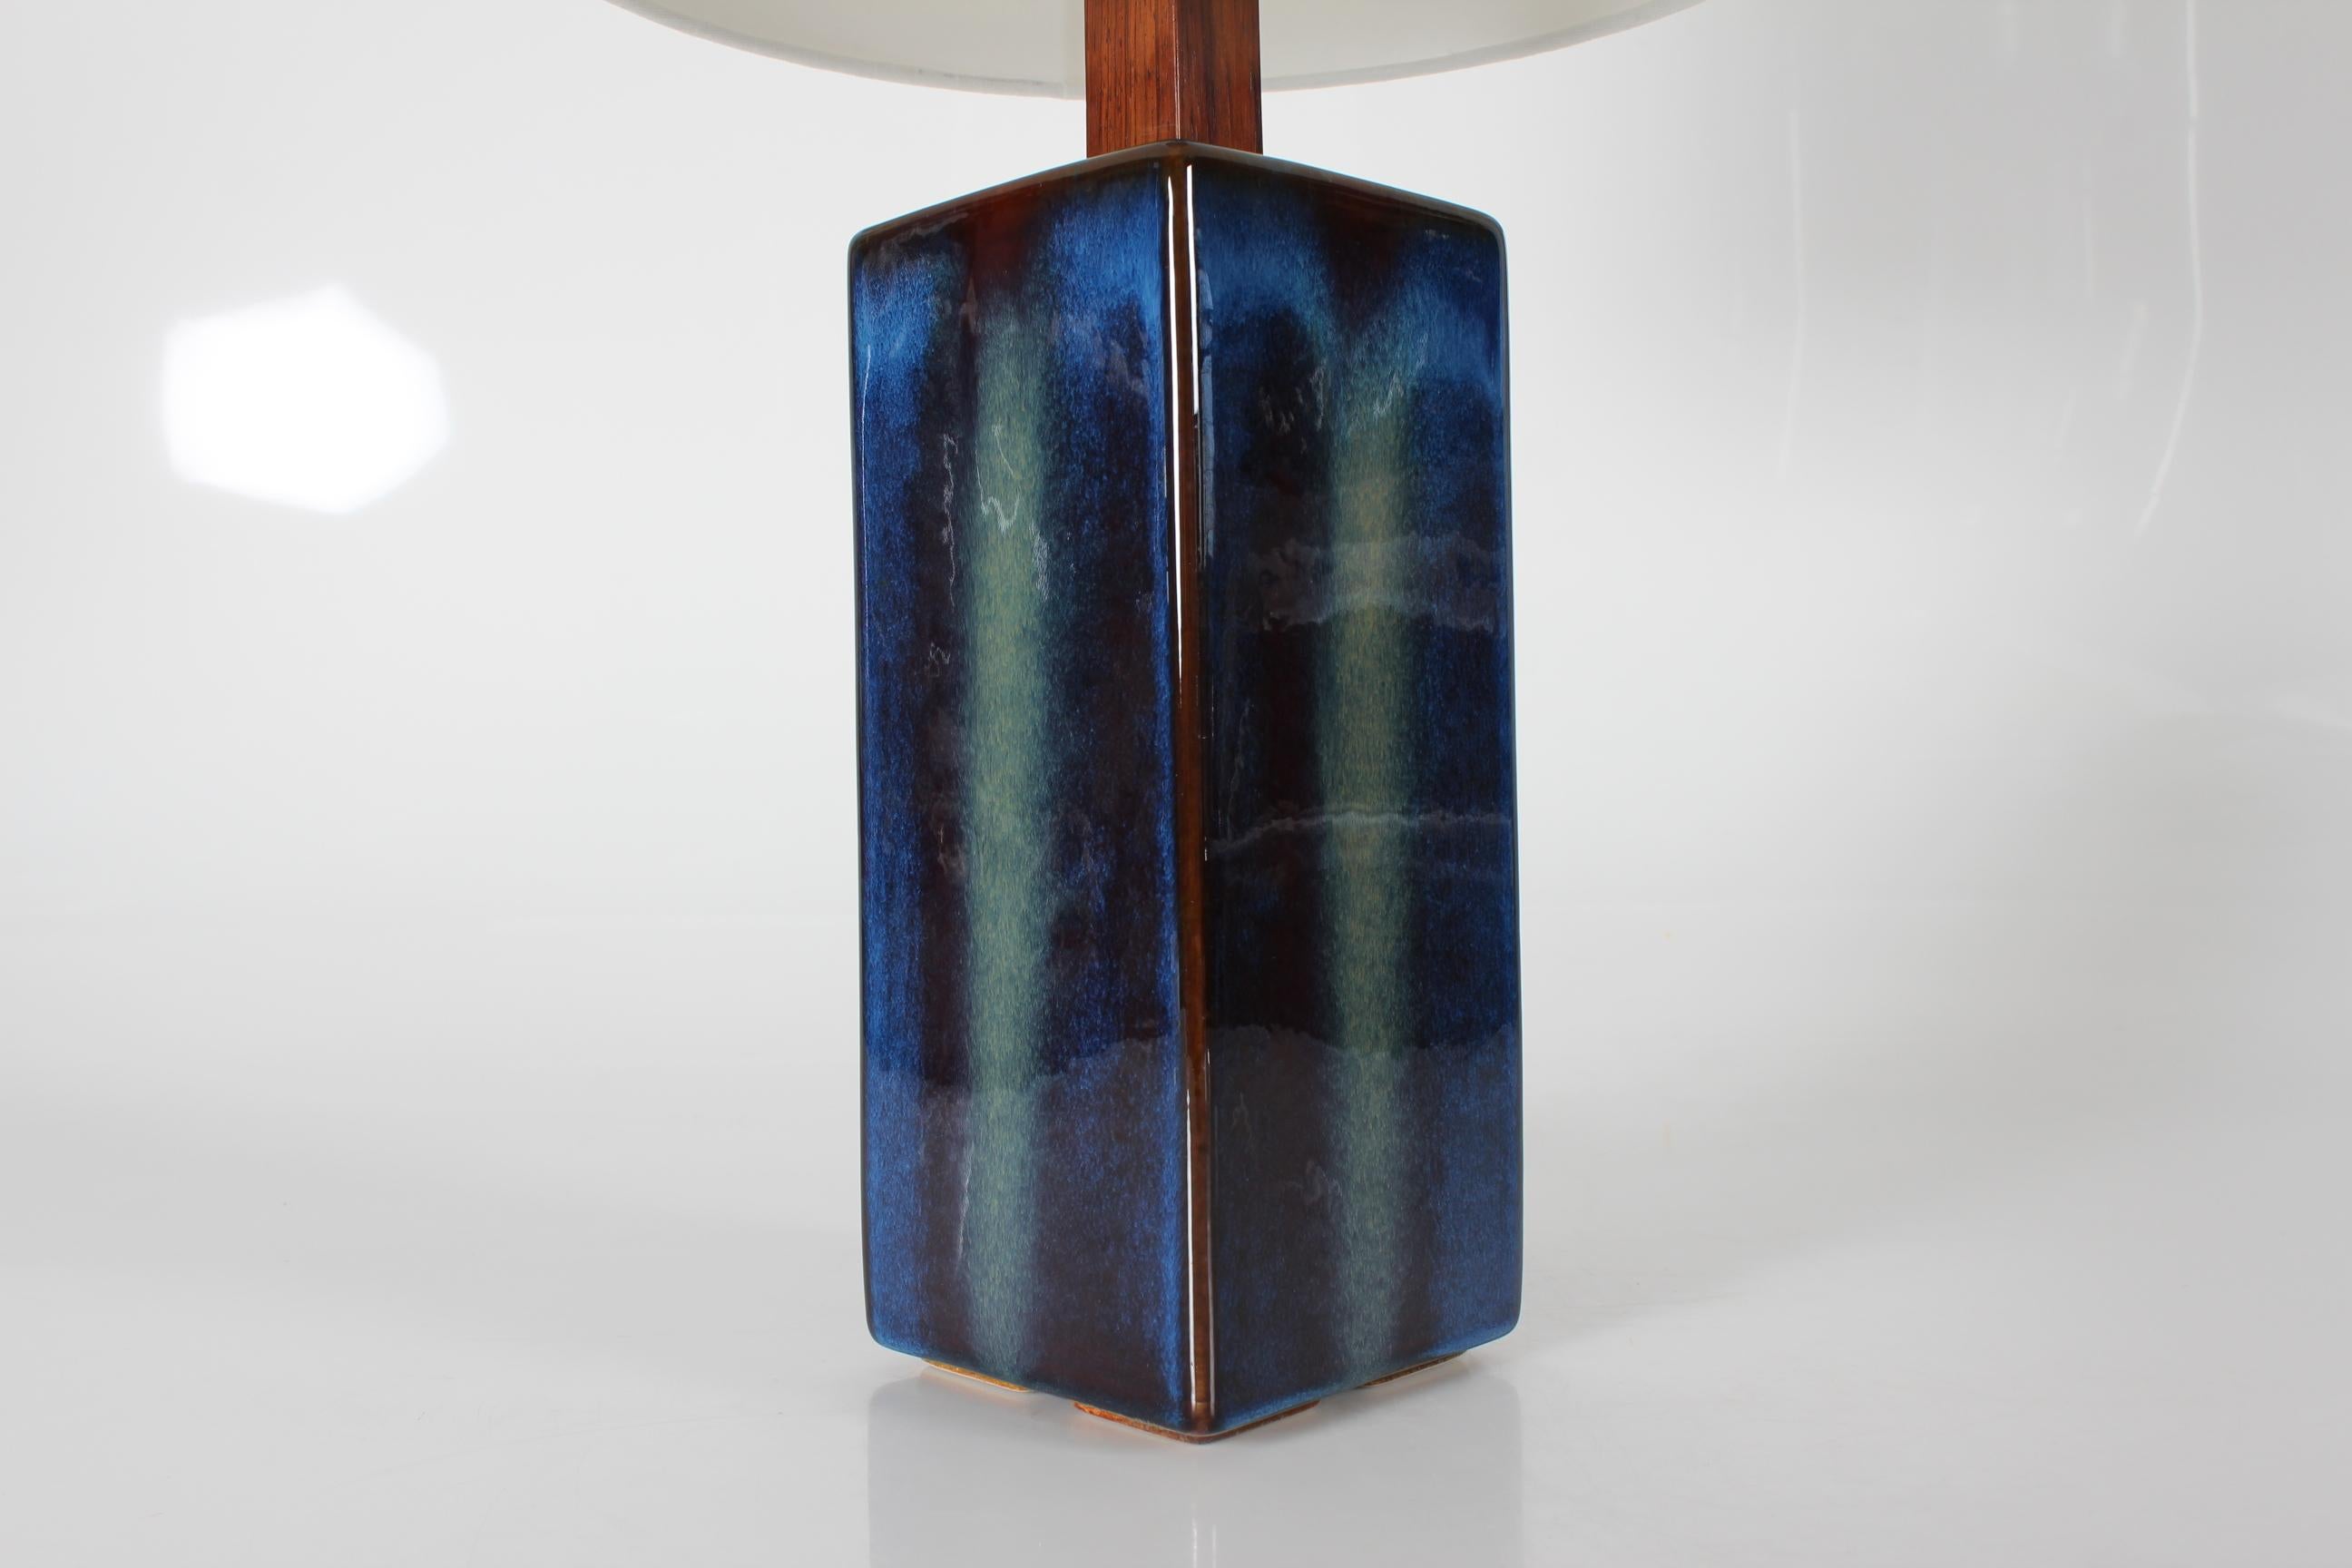 Tall sculpturel ceramic table lamp made by Søholm Stentøj, Denmark.
Made circa 1960s.

Decorated with midnight blue glaze with a twist of green turning into dark brown at the edges. 
The socket is fitted to a delicate square block of wood on top of